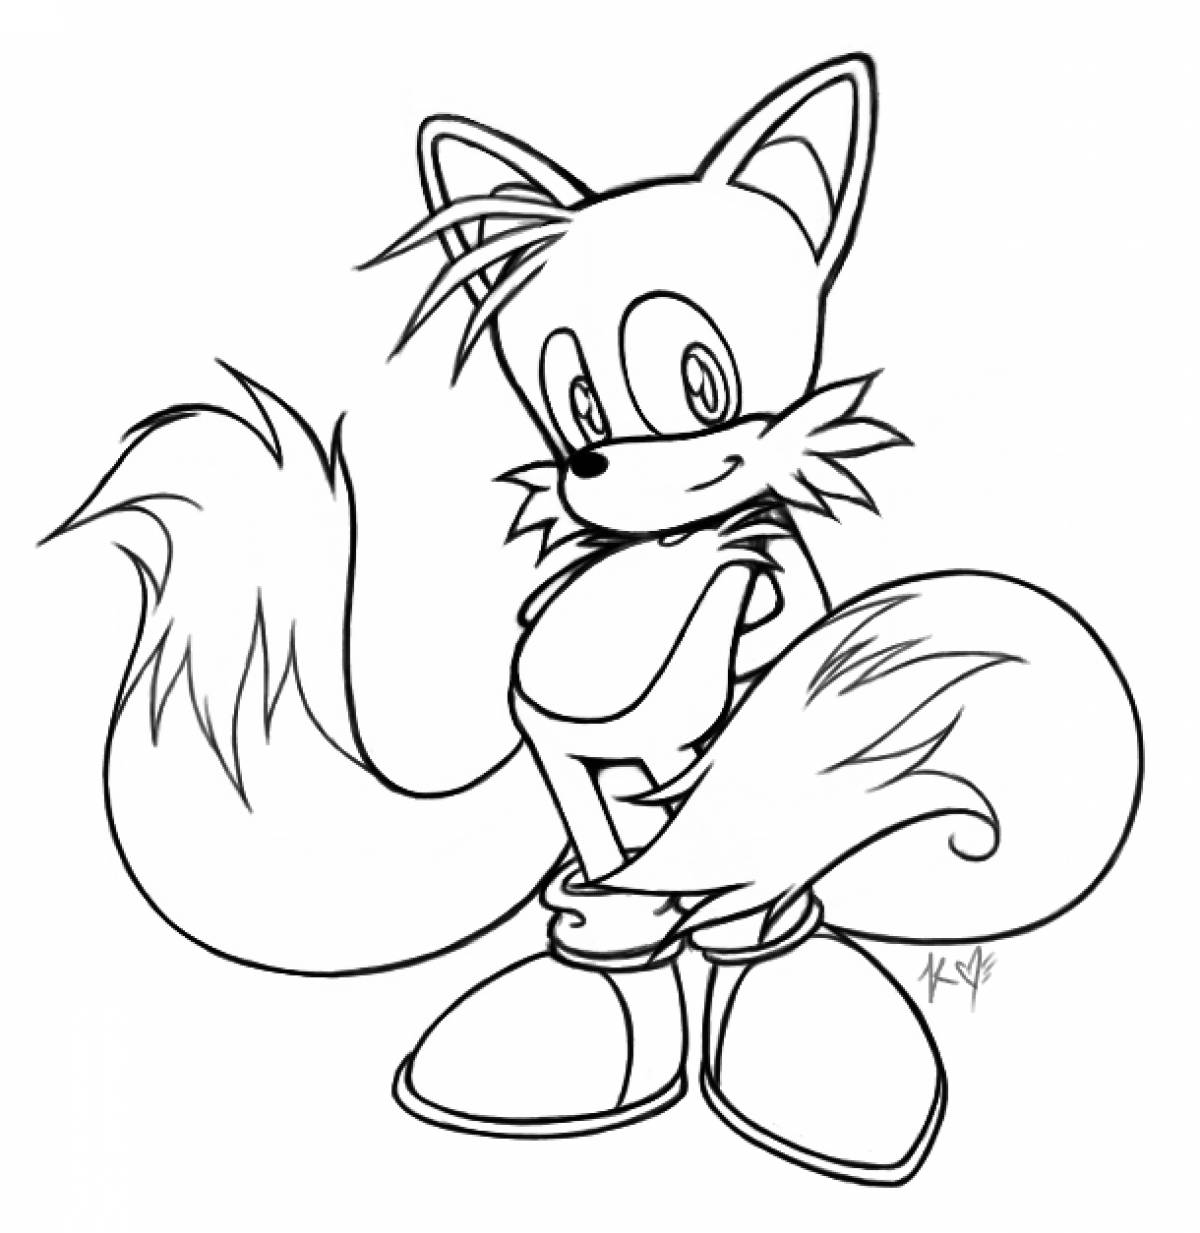 Colorful coloring pages with tails